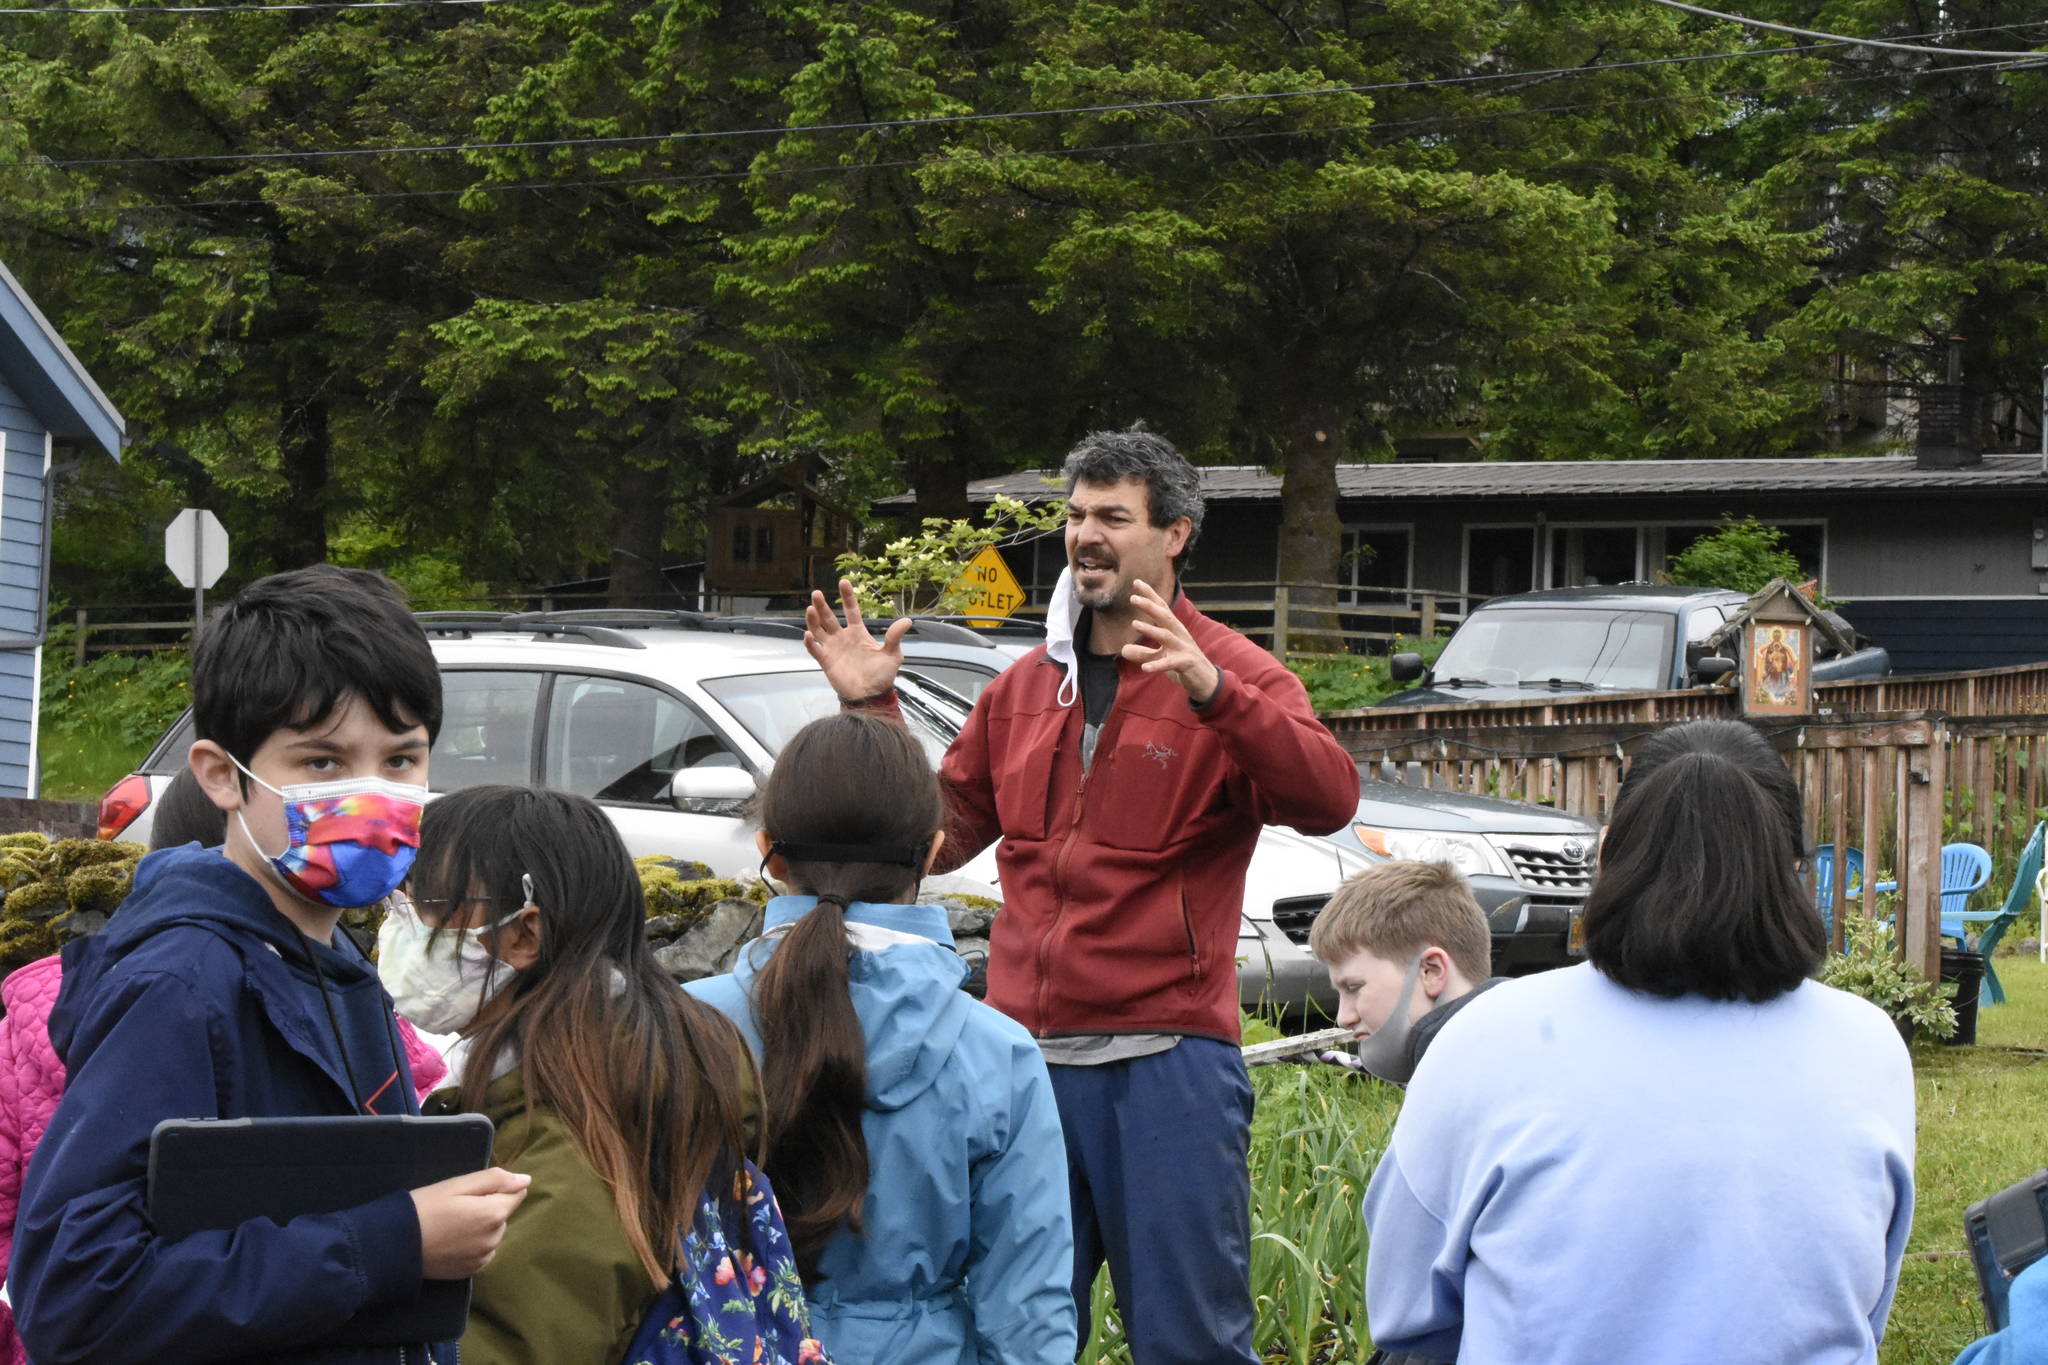 Darren Snyder, who helps manage community gardens as part of the the University of Alaska Fairbanks Cooperative Extension Service, talks to kids about gardening in Southeast Alaska on June 11, 2021. (Peter Segall / Juneau Empire)